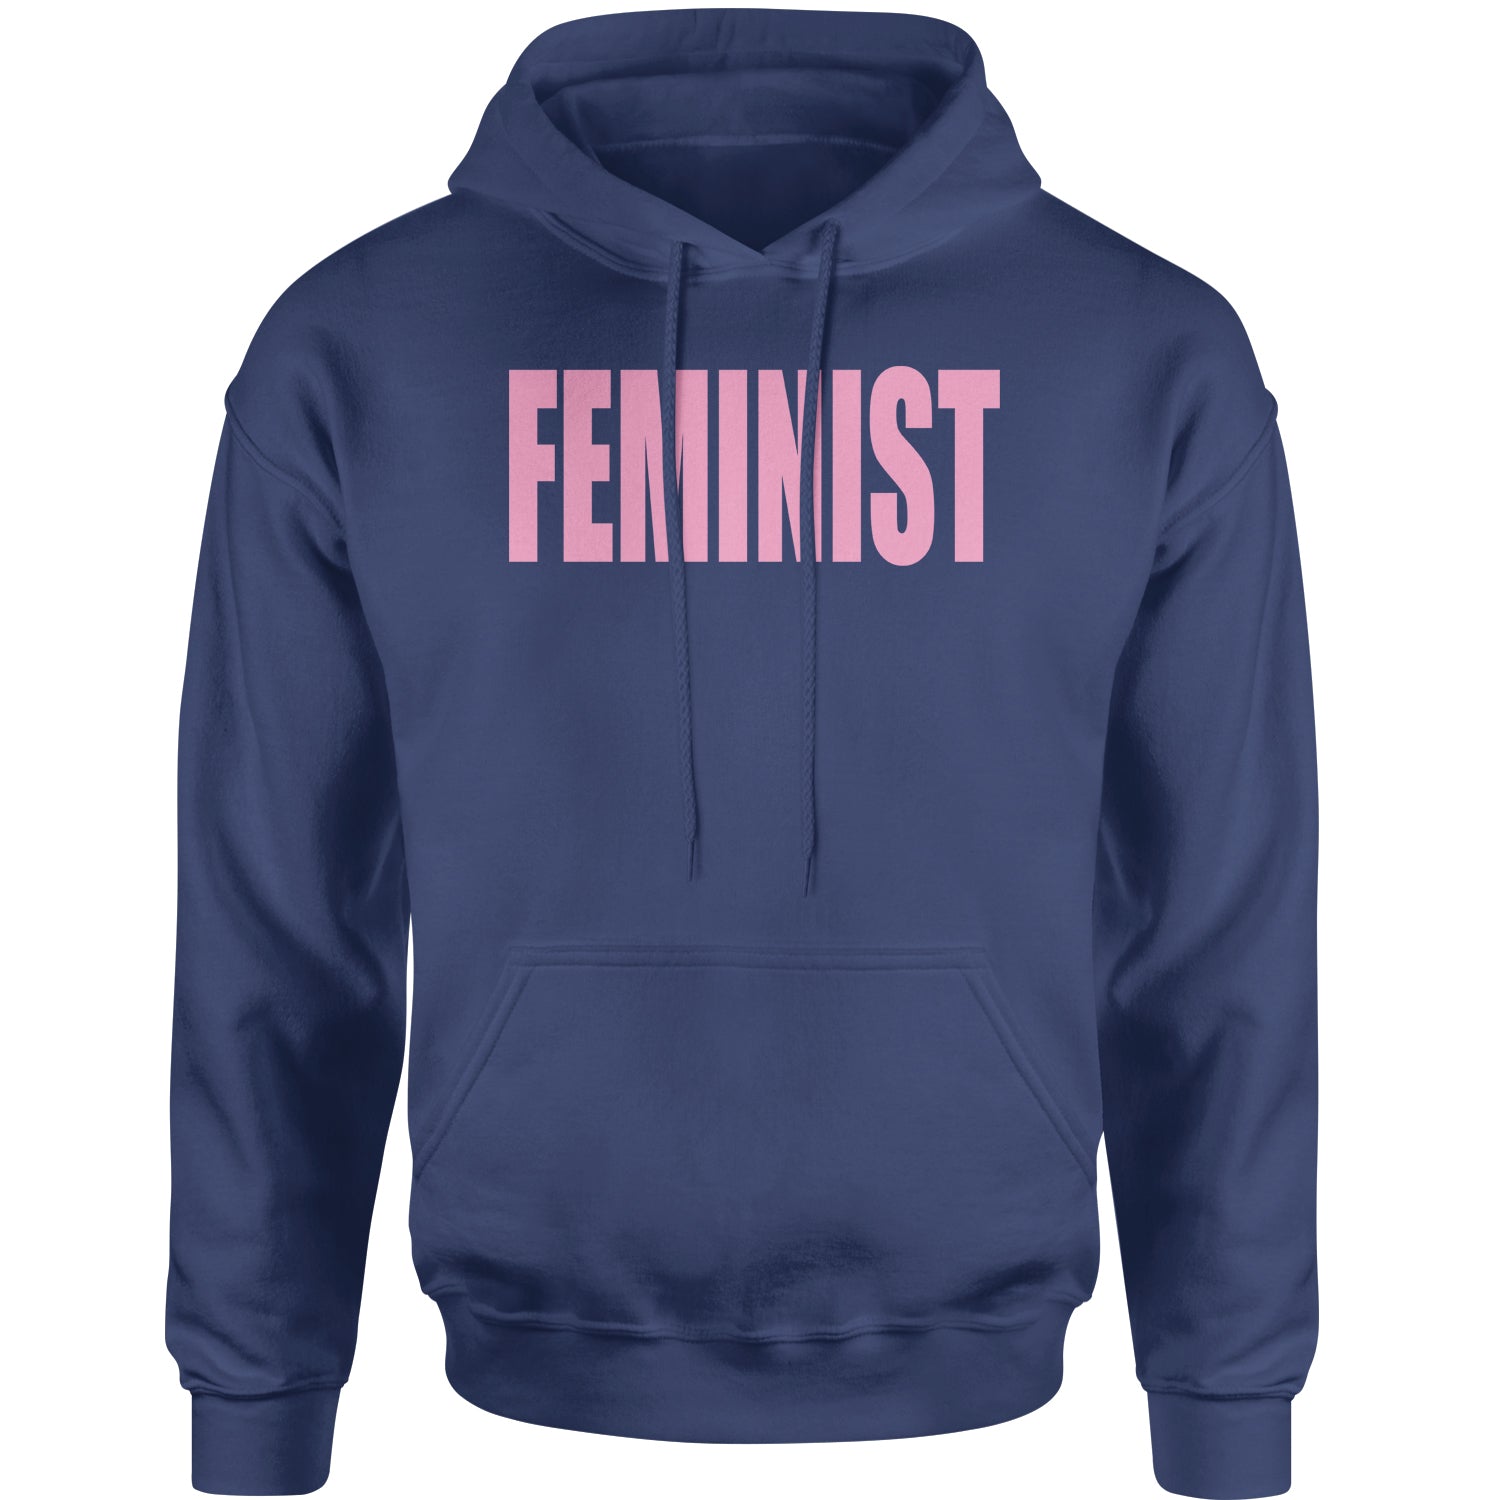 Feminist (Pink Print) Adult Hoodie Sweatshirt a, equal, equality, feminism, feminist, gender, is, lgbtq, like, looks, nevertheless, pay, persisted, rights, she, this, what by Expression Tees